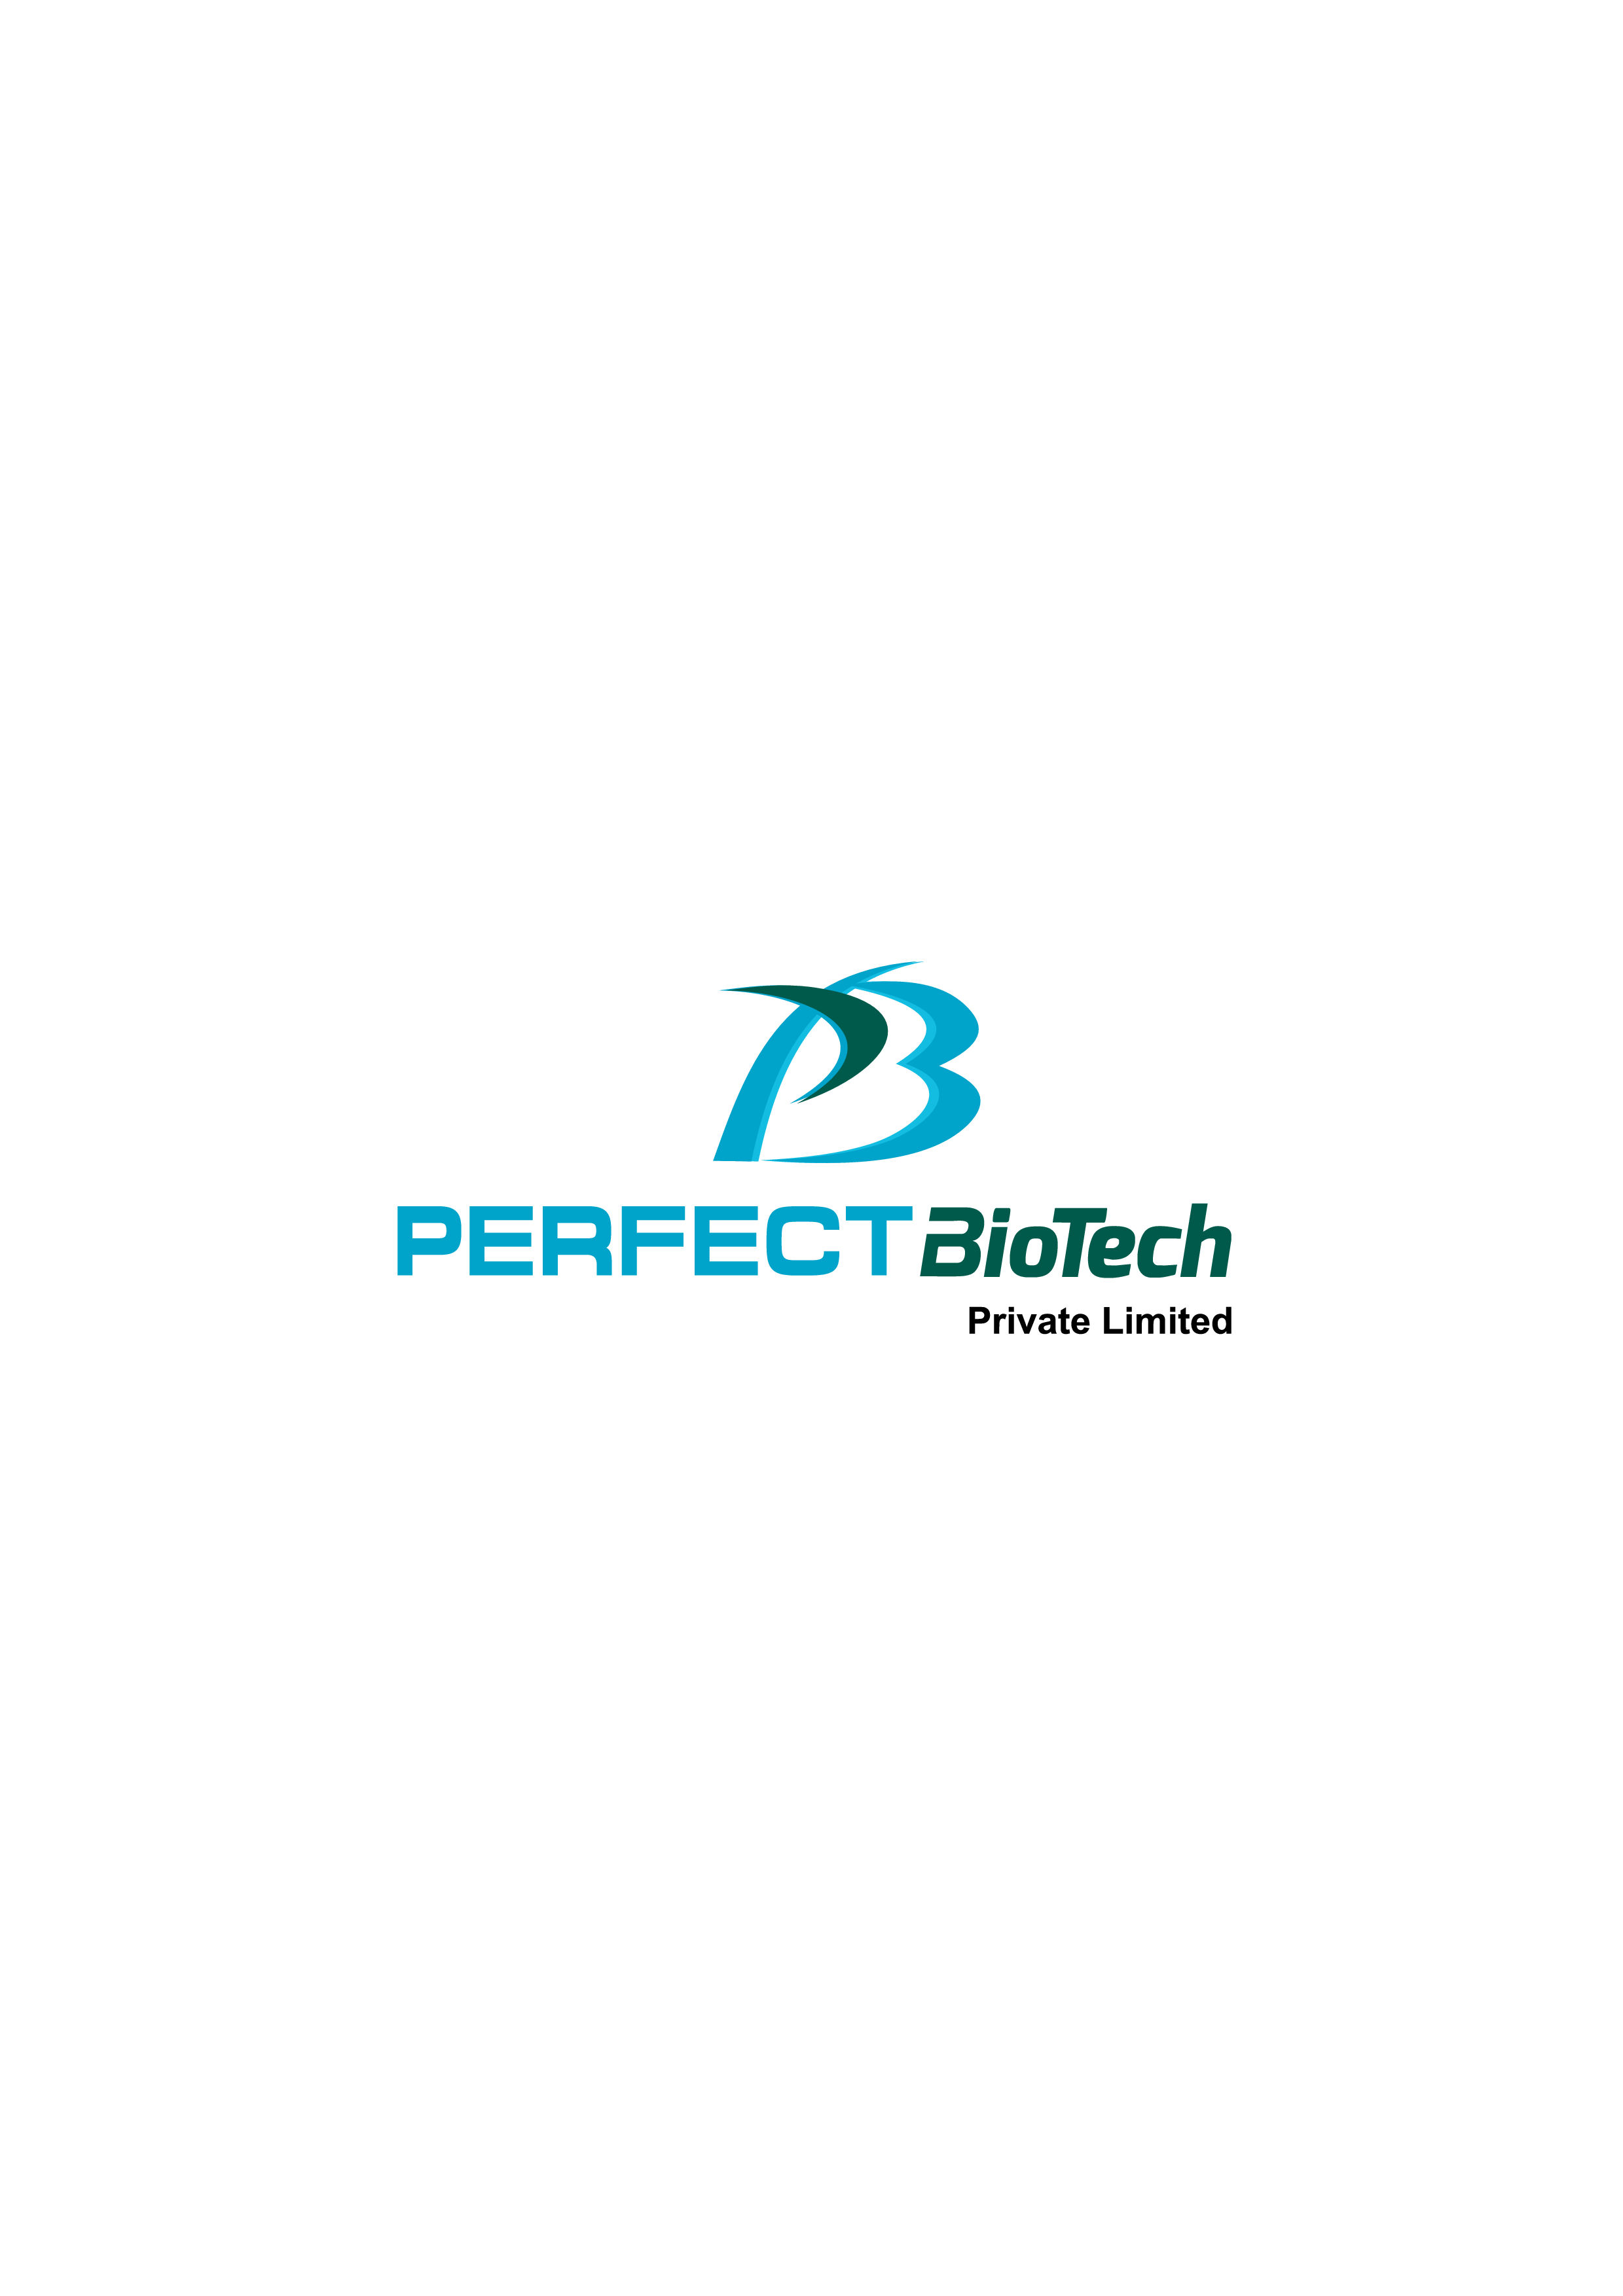 PERFECT BIOTECH PRIVATE LIMITED